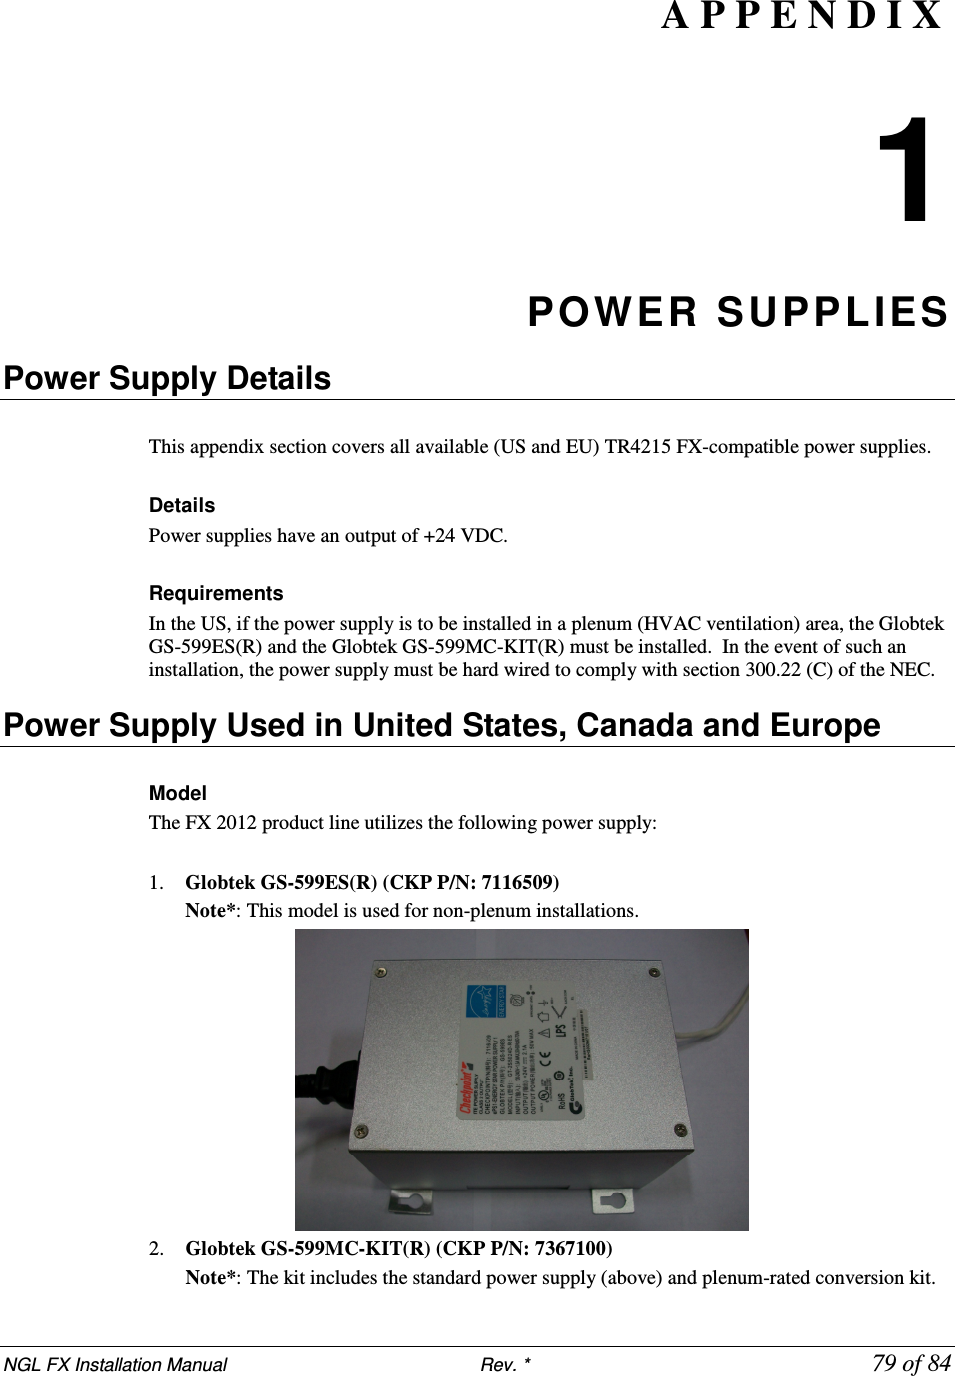 NGL FX Installation Manual                           Rev. *            79 of 84 A P P E N D I X   1 POWER SUPPLIES Power Supply Details    This appendix section covers all available (US and EU) TR4215 FX-compatible power supplies.  Details Power supplies have an output of +24 VDC.    Requirements In the US, if the power supply is to be installed in a plenum (HVAC ventilation) area, the Globtek GS-599ES(R) and the Globtek GS-599MC-KIT(R) must be installed.  In the event of such an installation, the power supply must be hard wired to comply with section 300.22 (C) of the NEC.  Power Supply Used in United States, Canada and Europe    Model  The FX 2012 product line utilizes the following power supply:  1. Globtek GS-599ES(R) (CKP P/N: 7116509) Note*: This model is used for non-plenum installations.   2. Globtek GS-599MC-KIT(R) (CKP P/N: 7367100)    Note*: The kit includes the standard power supply (above) and plenum-rated conversion kit. 